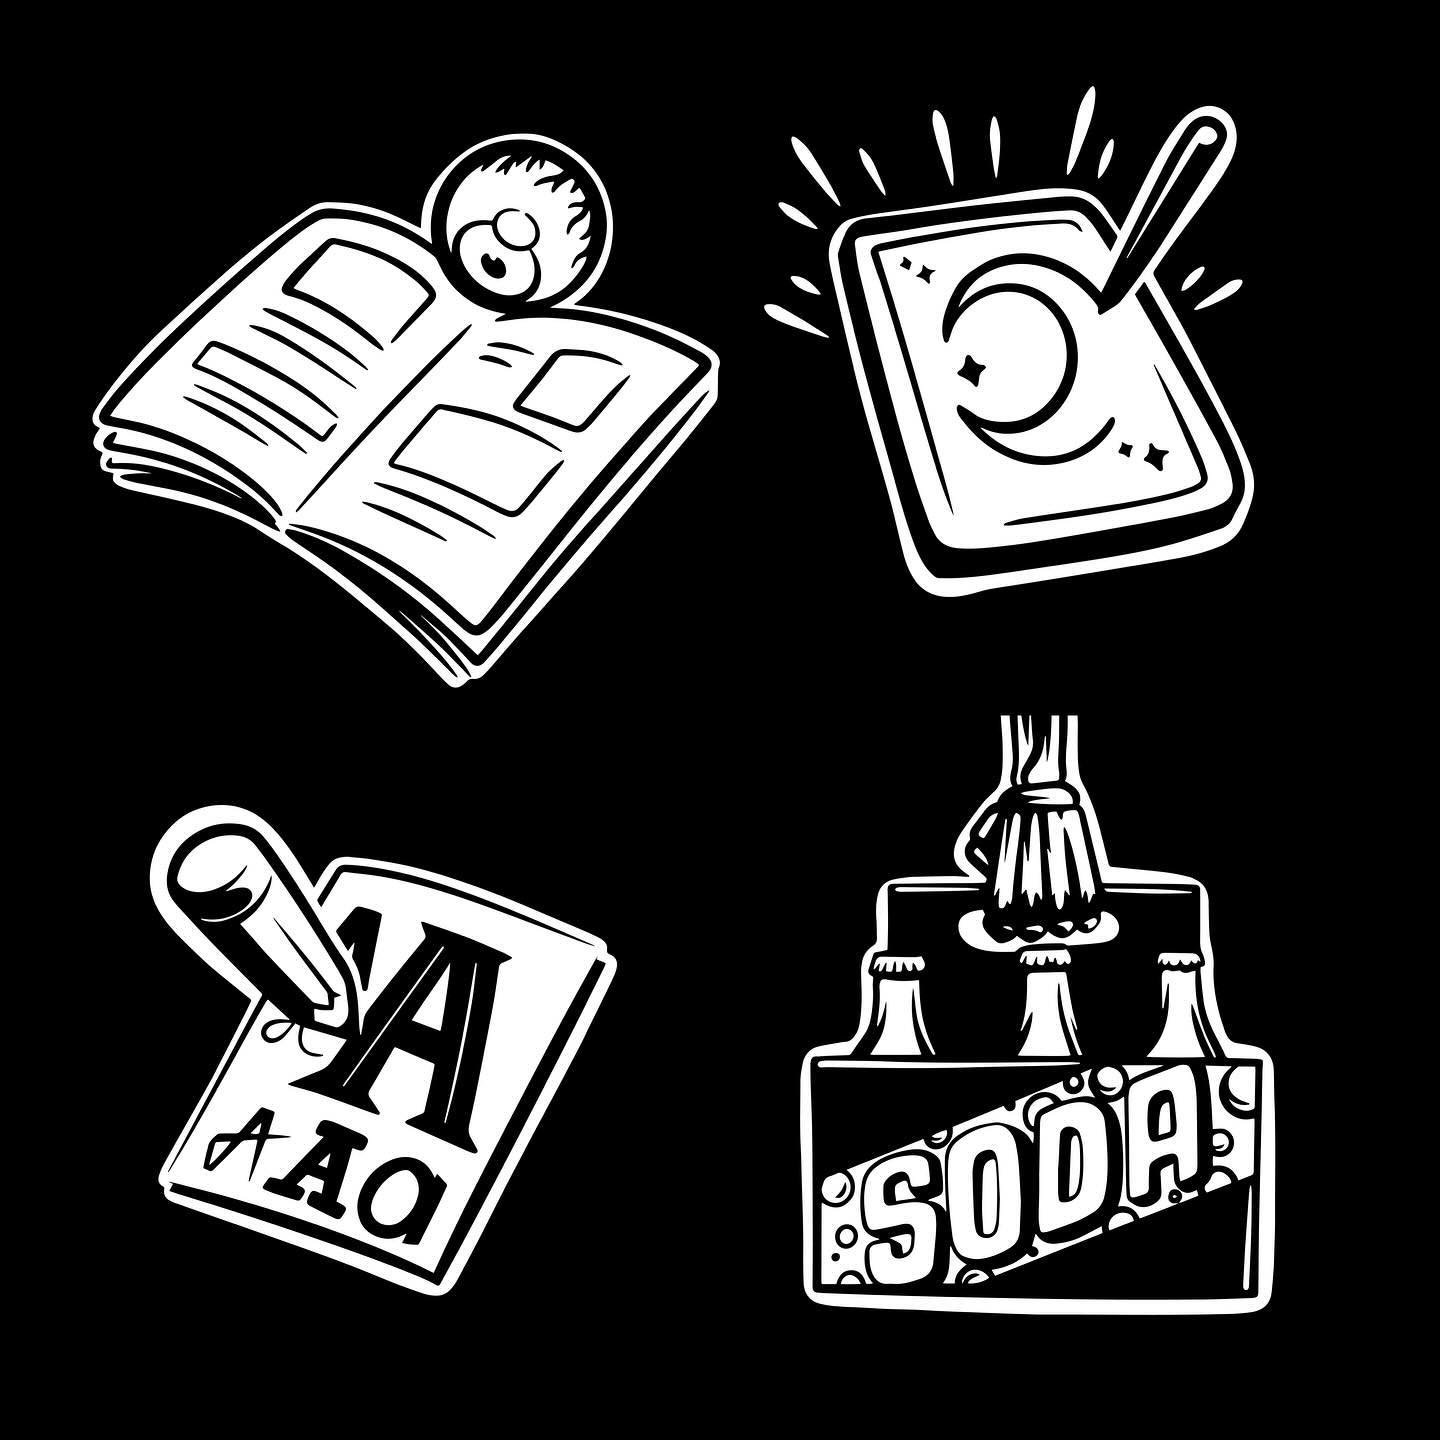 New illustrated icons for my services page ✍🏻 

#iconicdesigns #creativeicons #illustratedart #webdesignicons #digitalillustrations #graphicicons #artisticwebicons #iconography #designinspiration #iconartistry #uniqueicons #illustrationmastery #icon